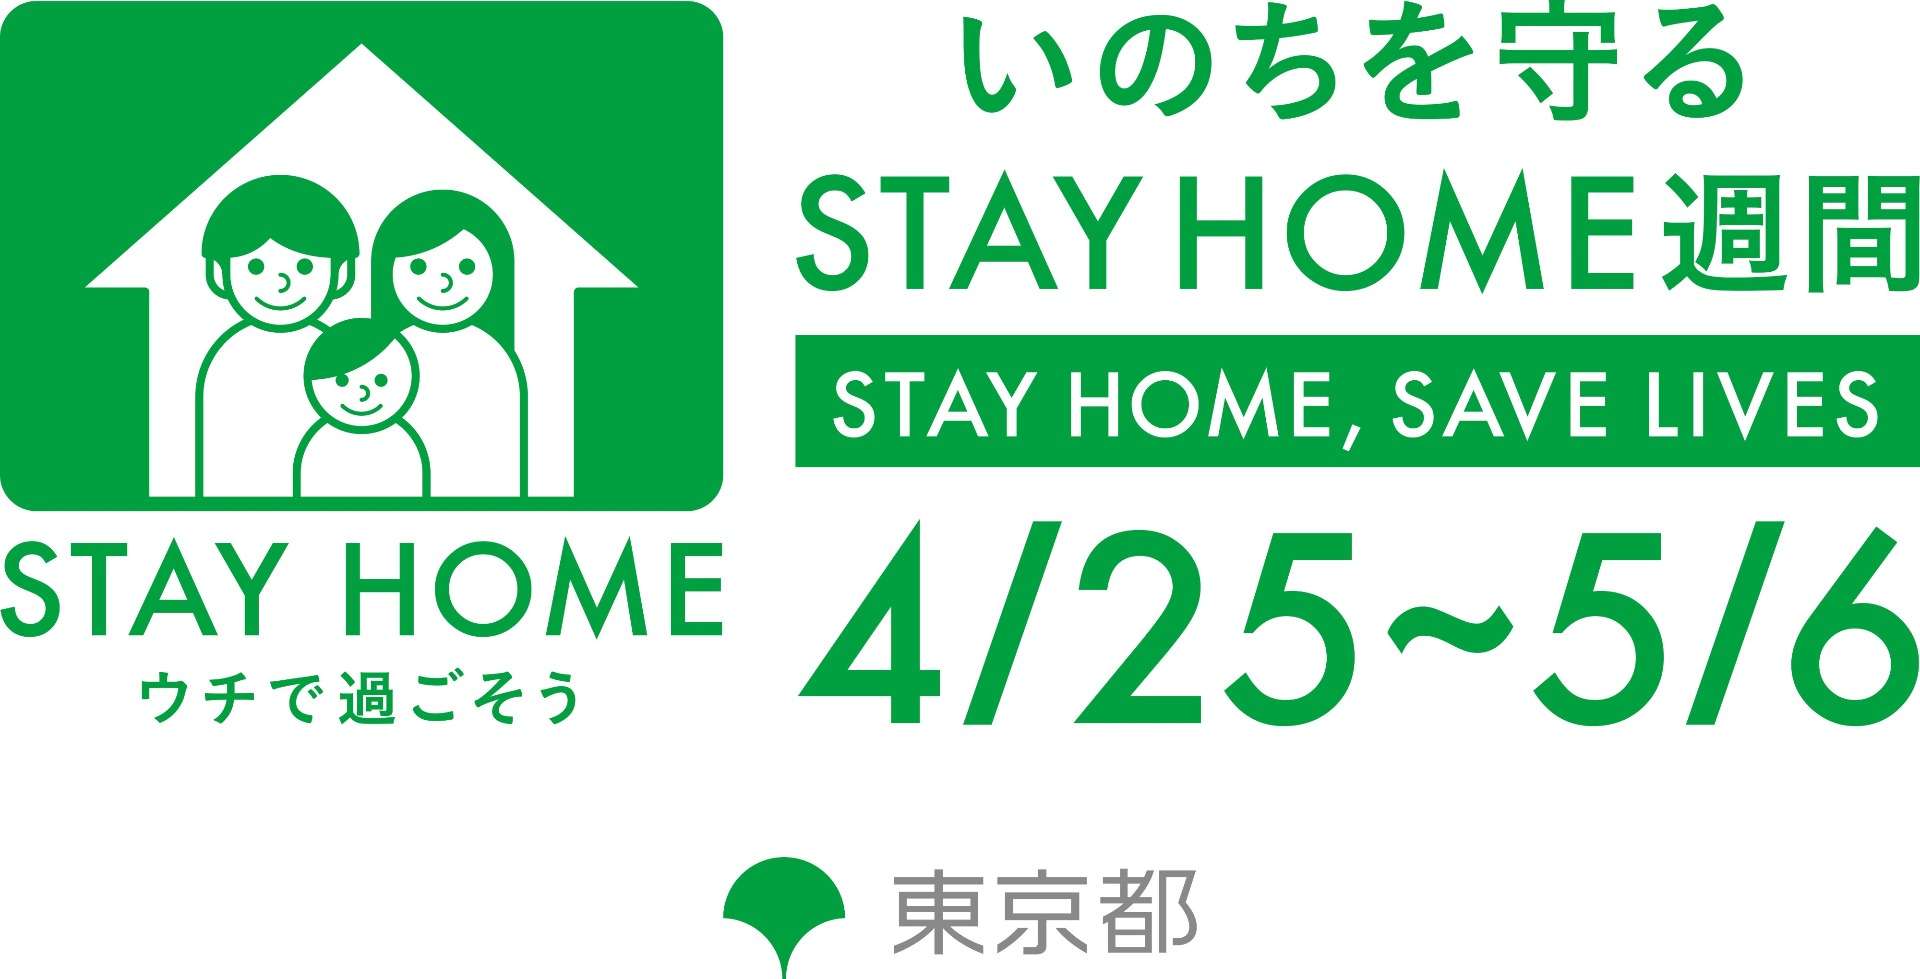 2020-04-28-stay-home- tokyo